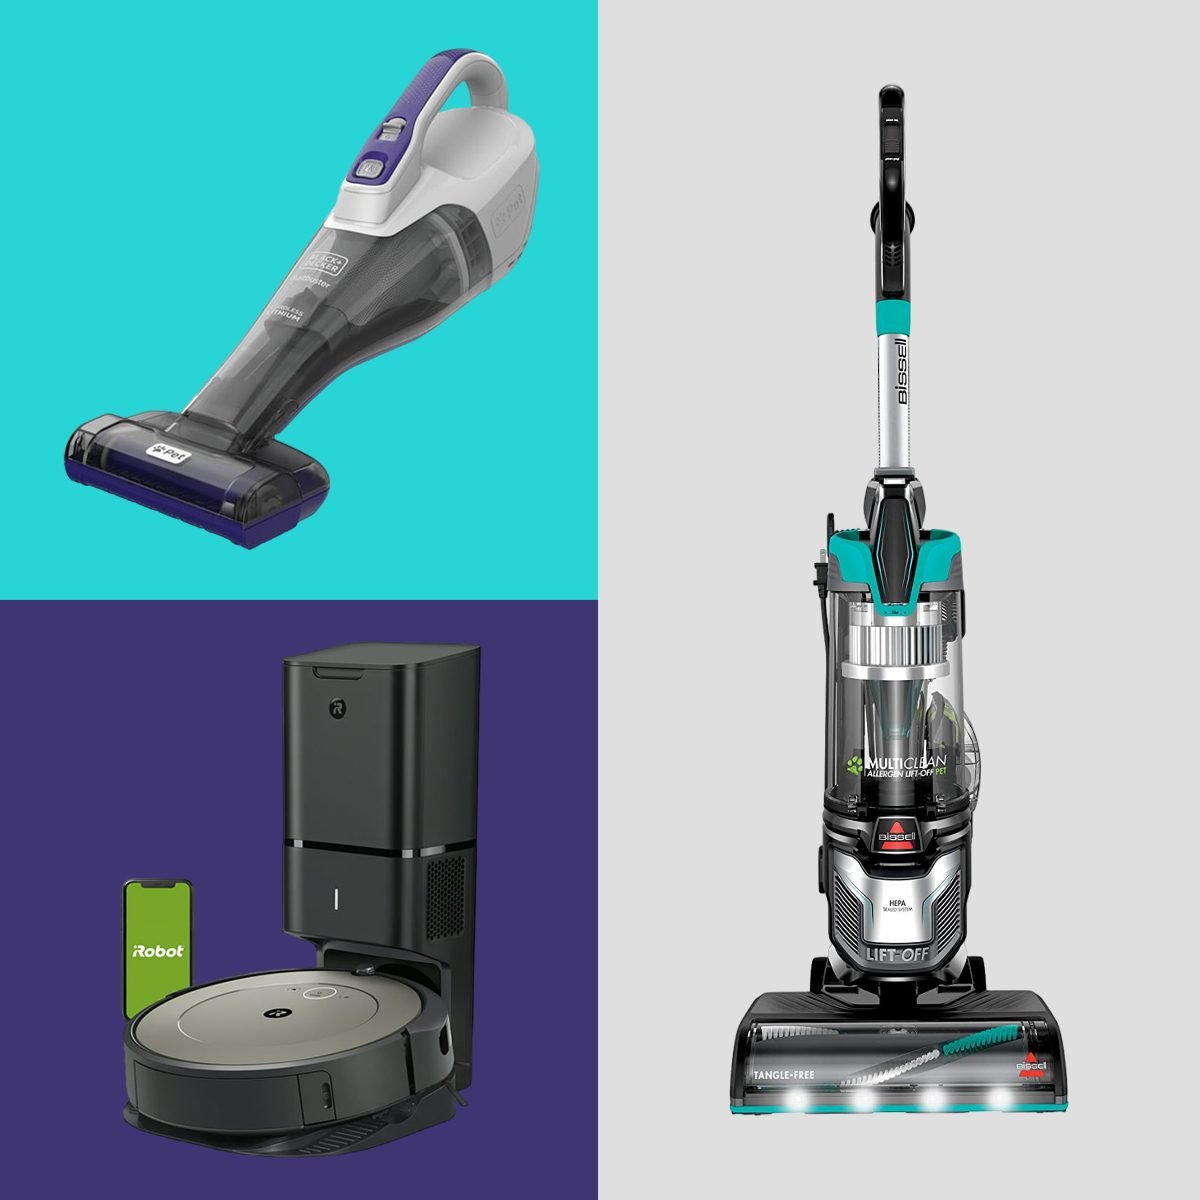 Deal of the Day on Bissell MultiClean Allergen Upright Vacuum